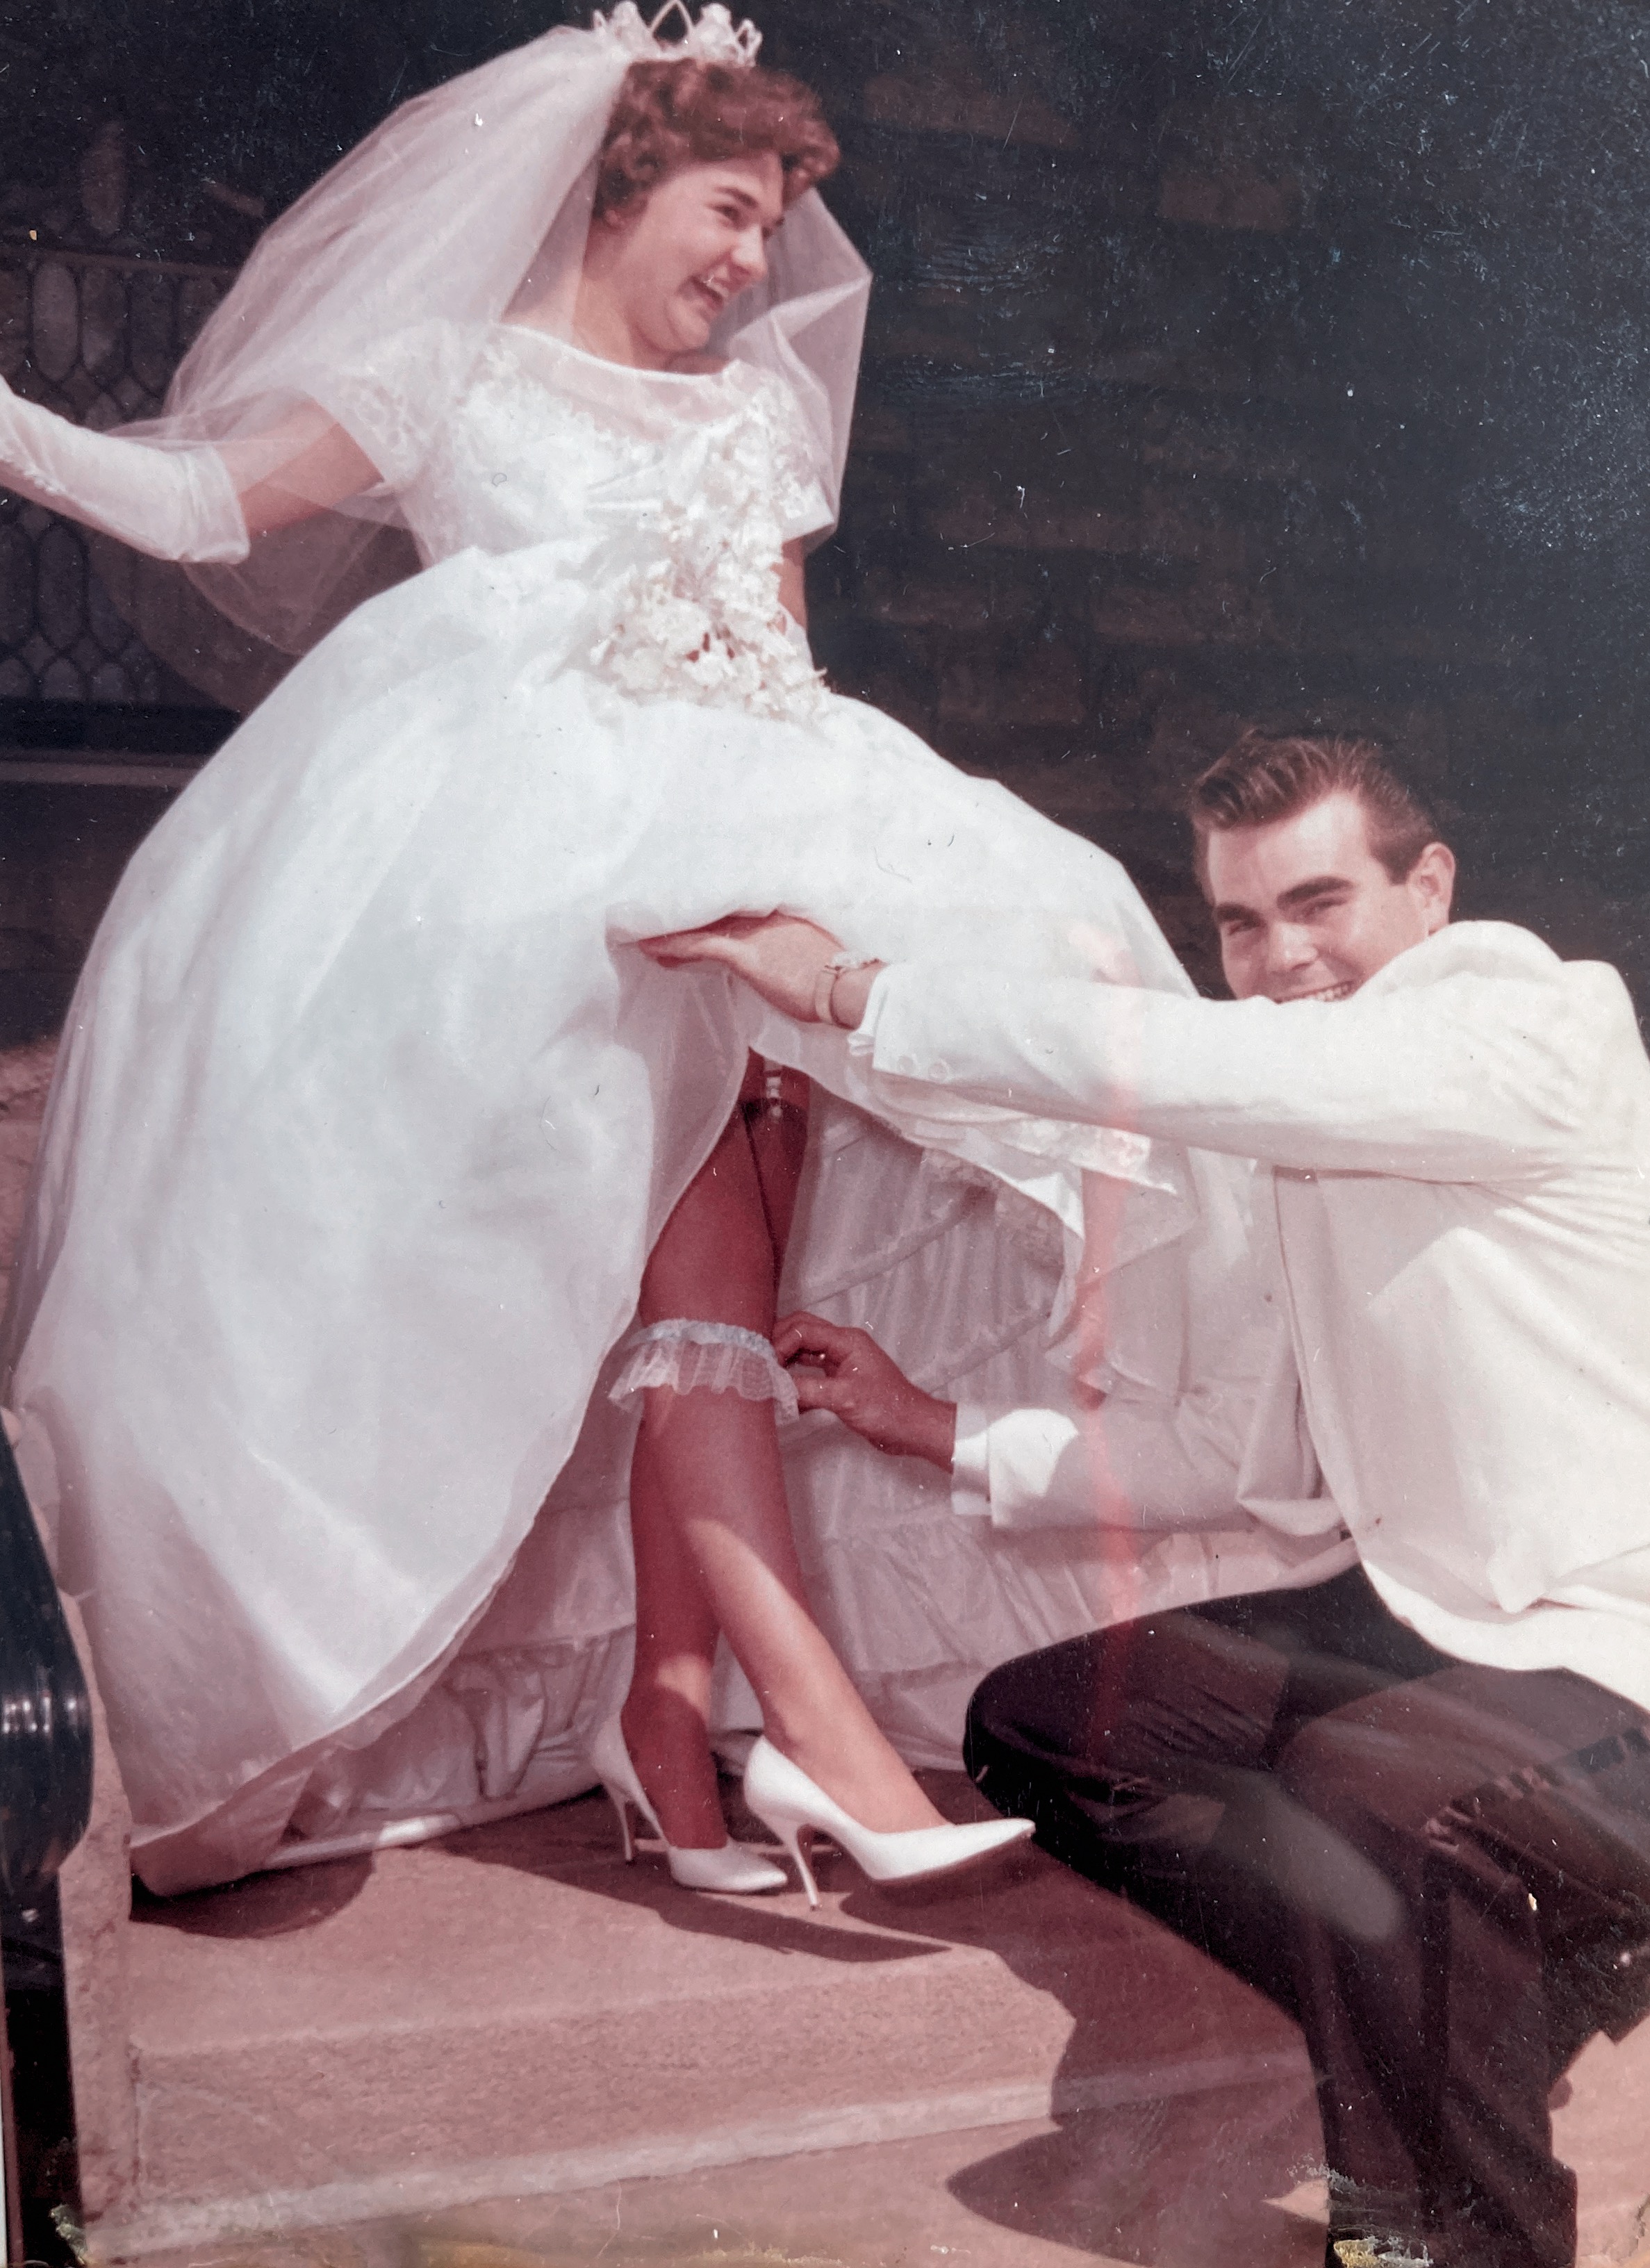 My mom and dad on their wedding day in 1961.